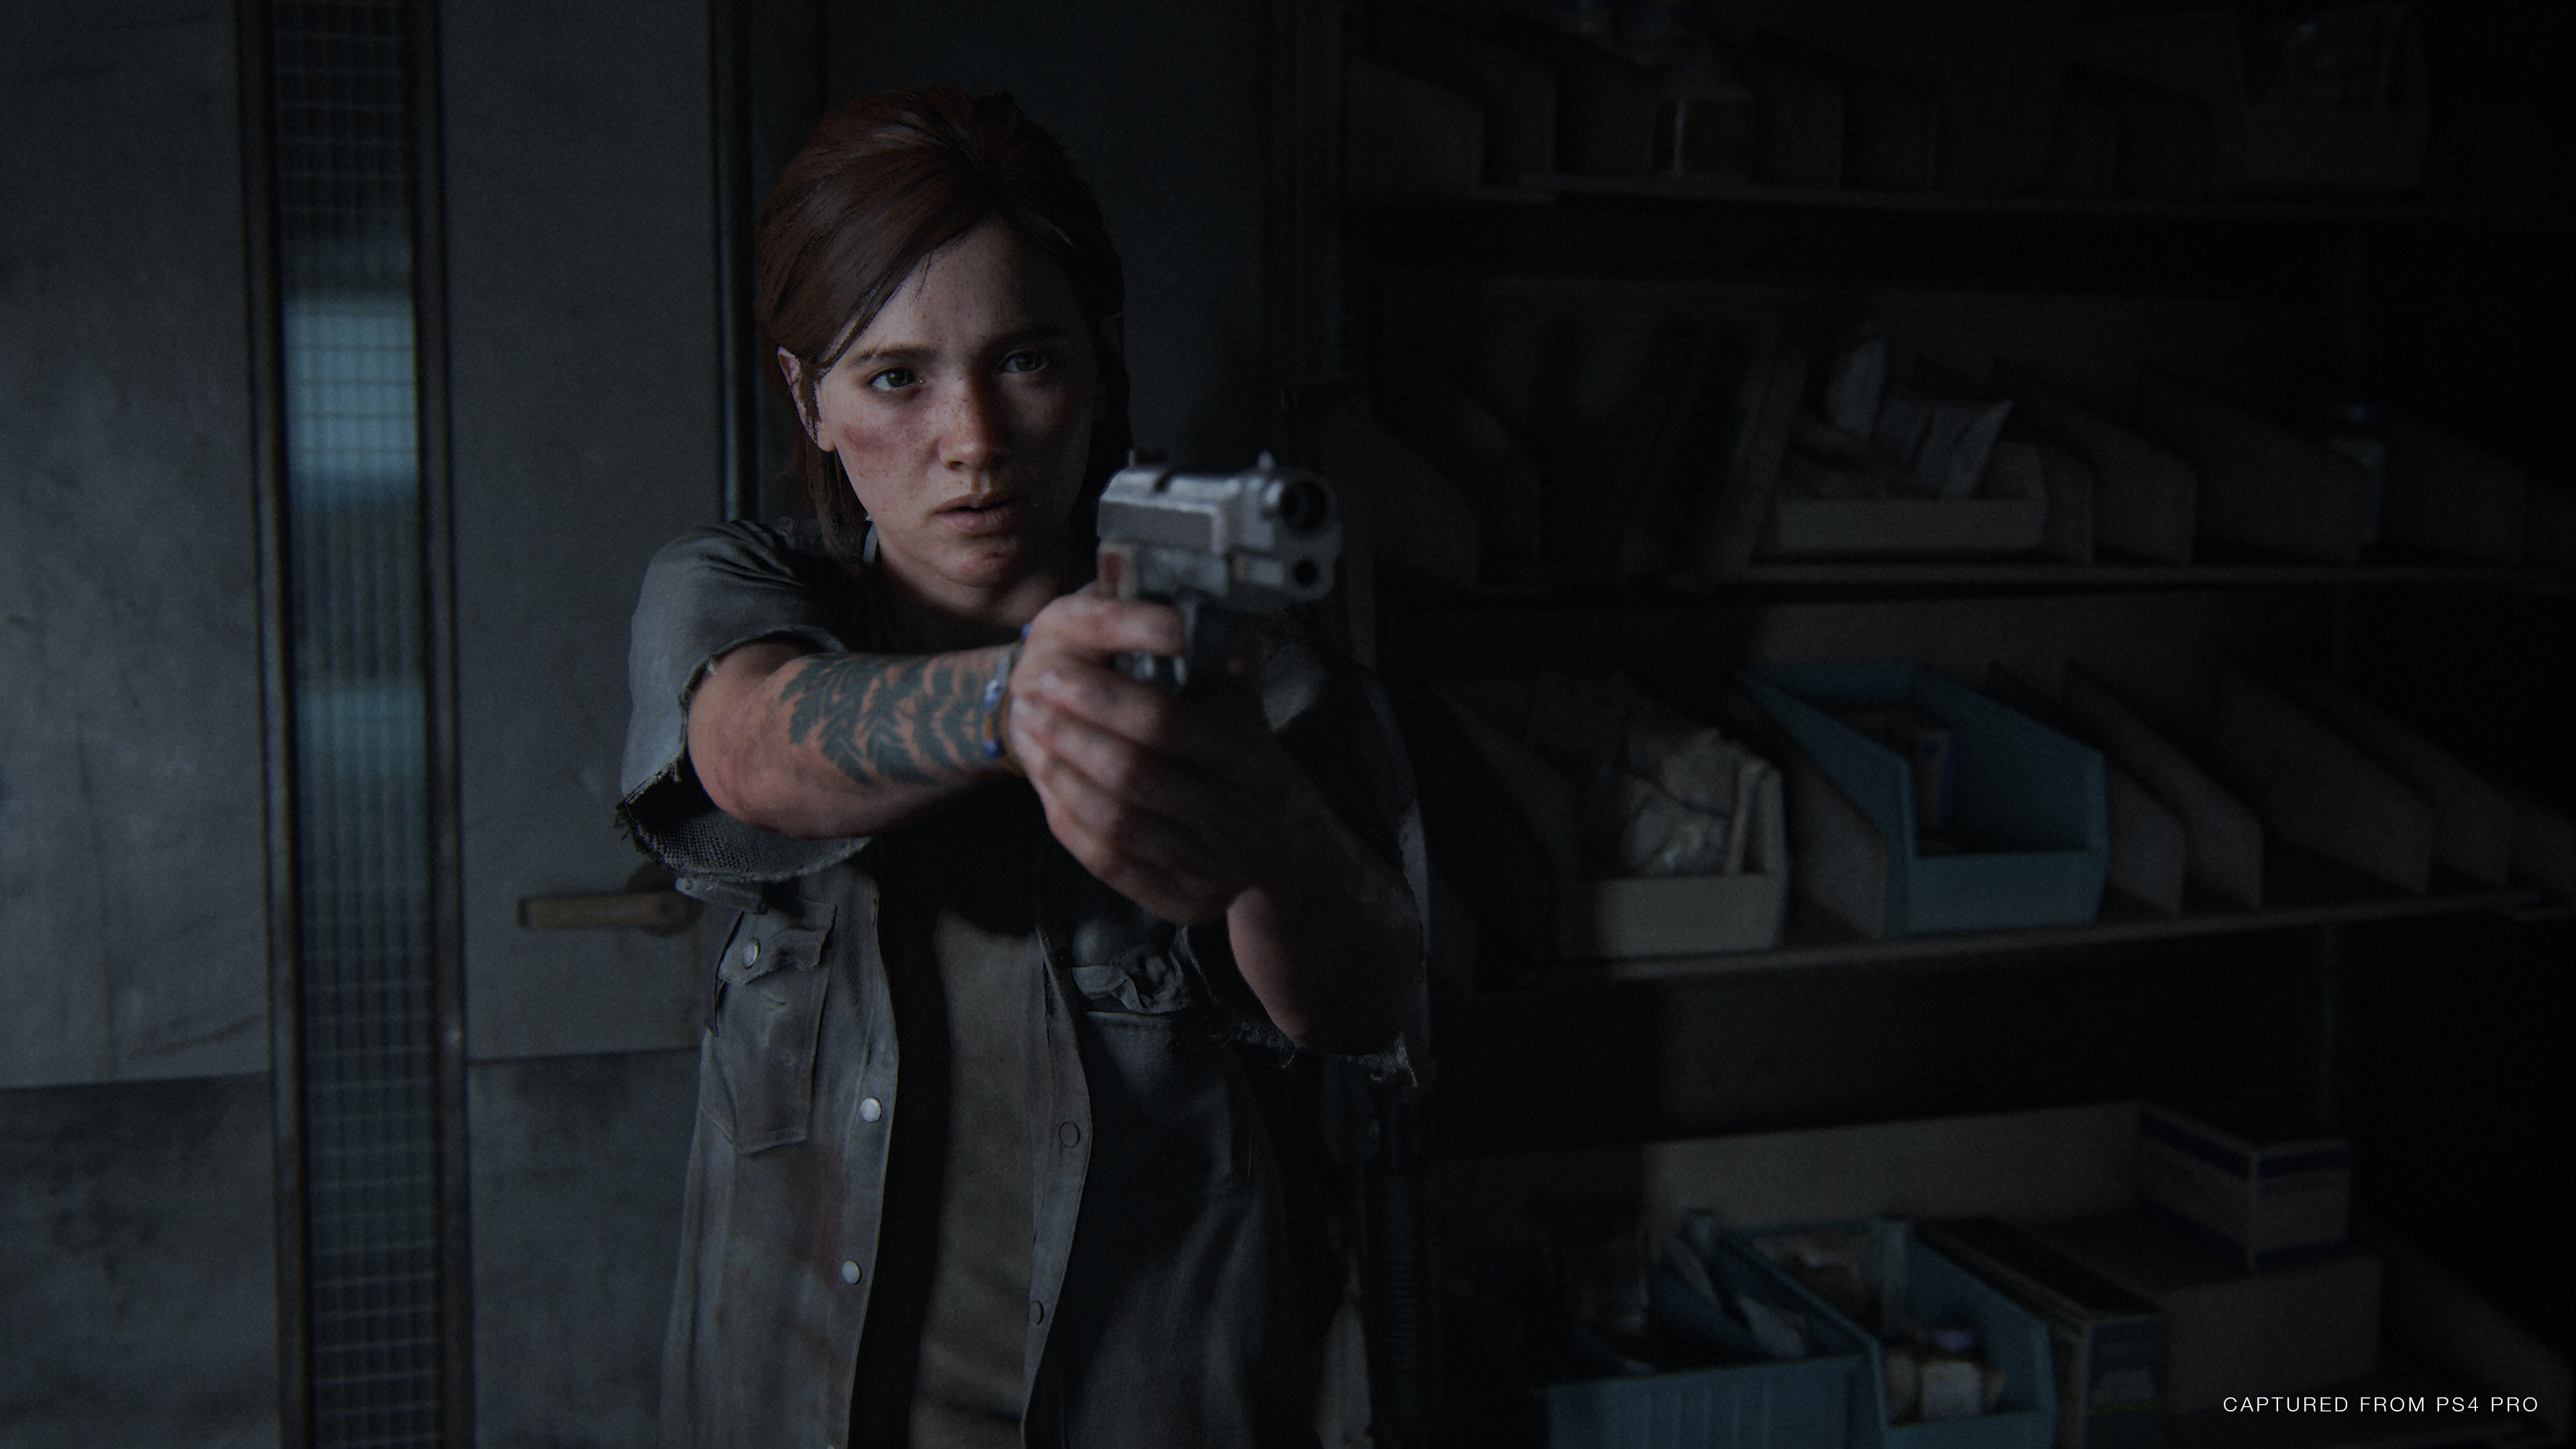 The Last of Us Part 2 Might Not Have Multiplayer, But Factions Will  “Eventually” Return, Naughty Dog Says